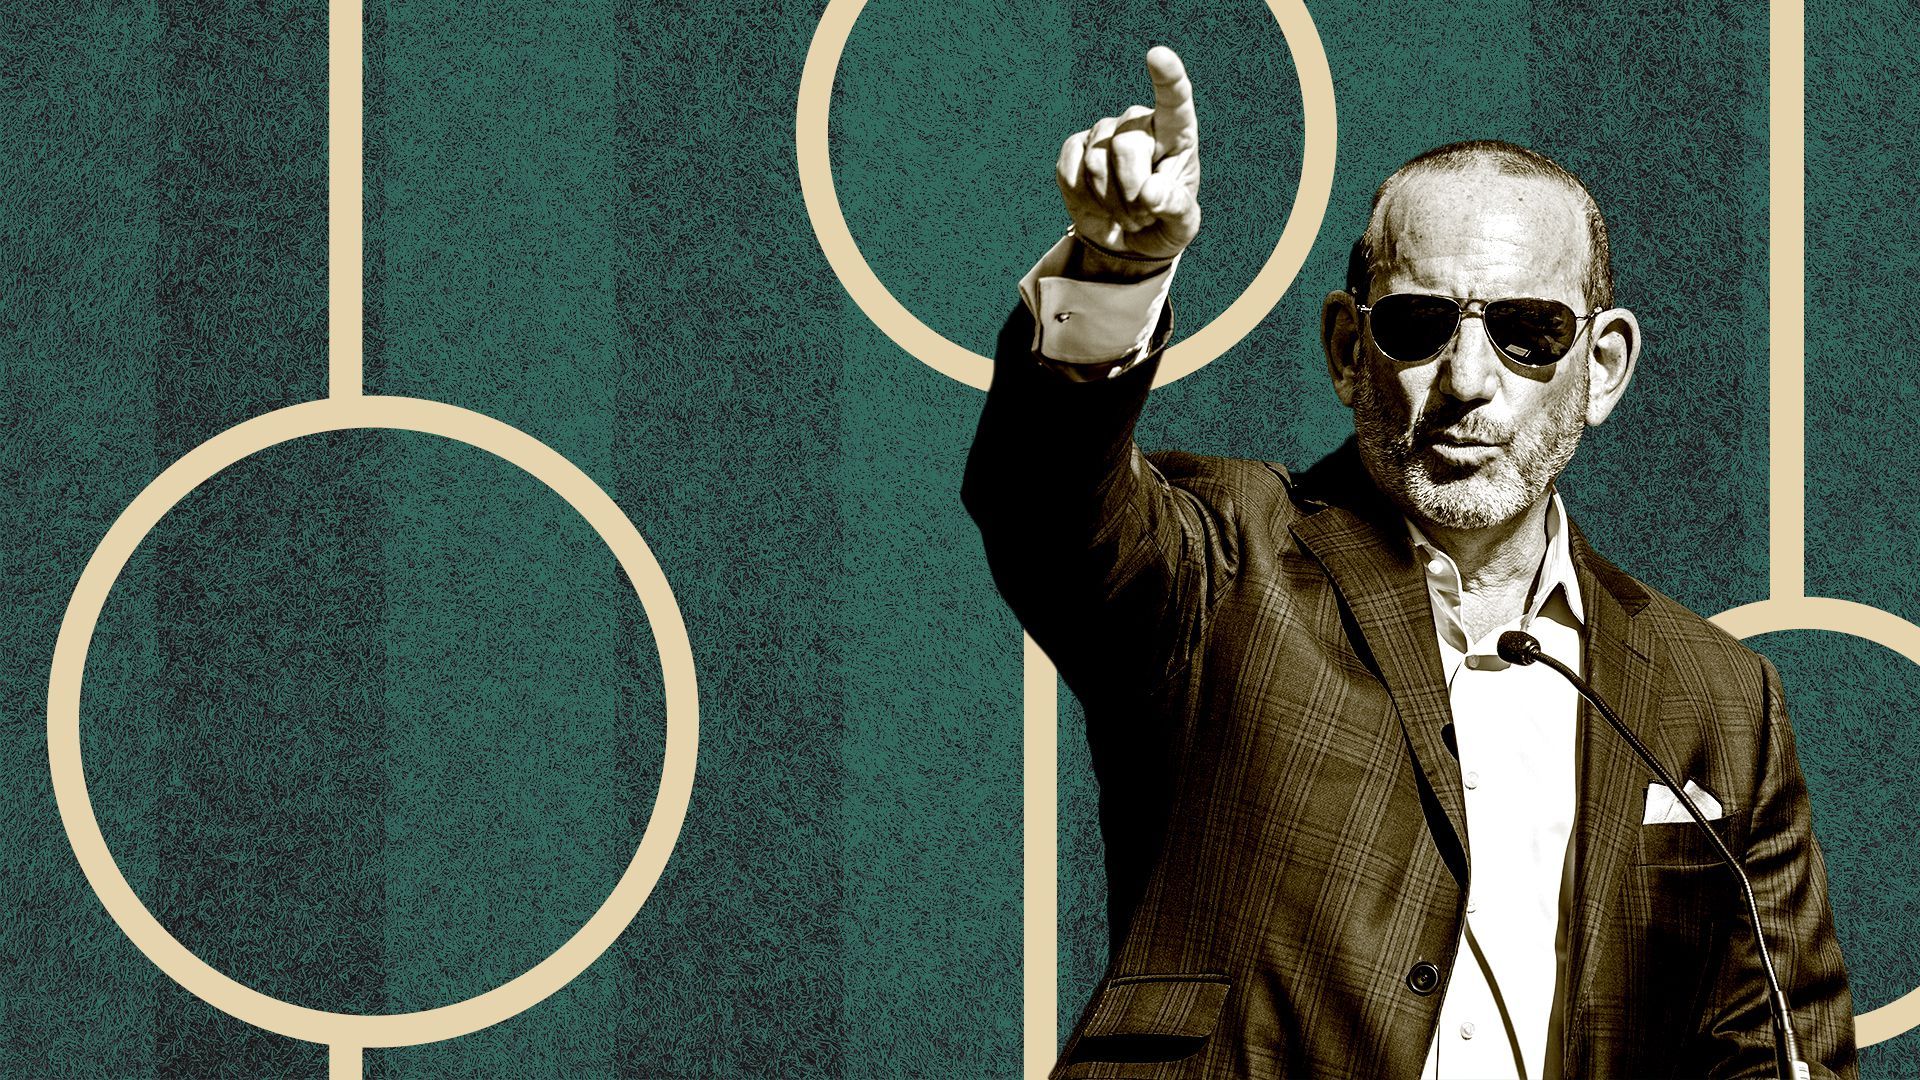 Photo illustration of Don Garber against a turf background and abstract soccer lines